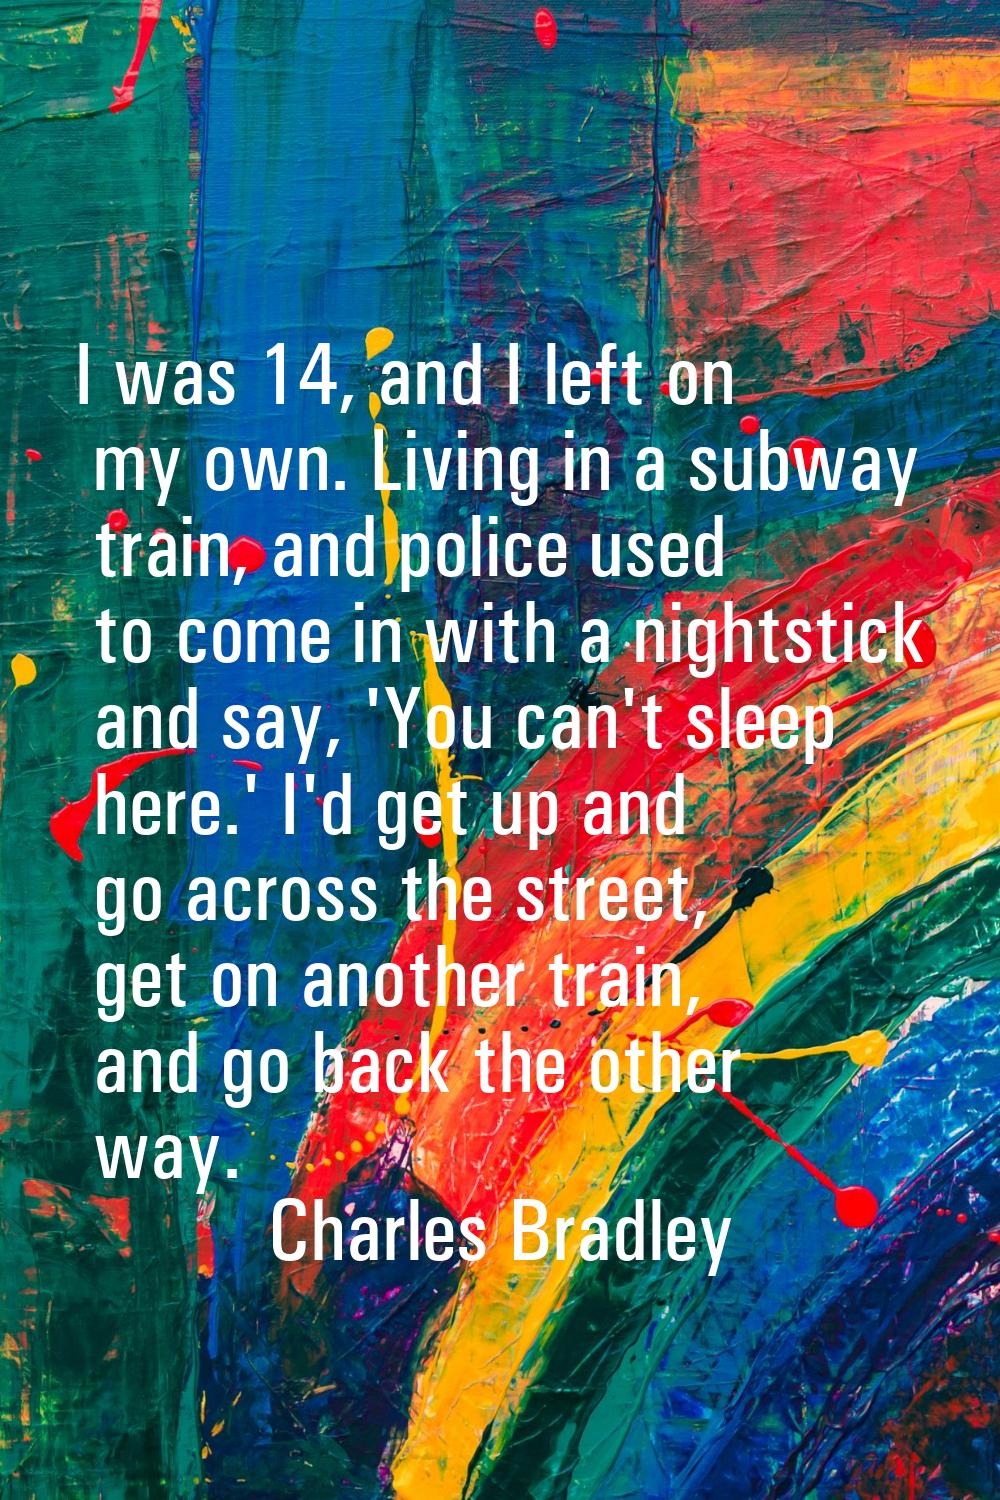 I was 14, and I left on my own. Living in a subway train, and police used to come in with a nightst